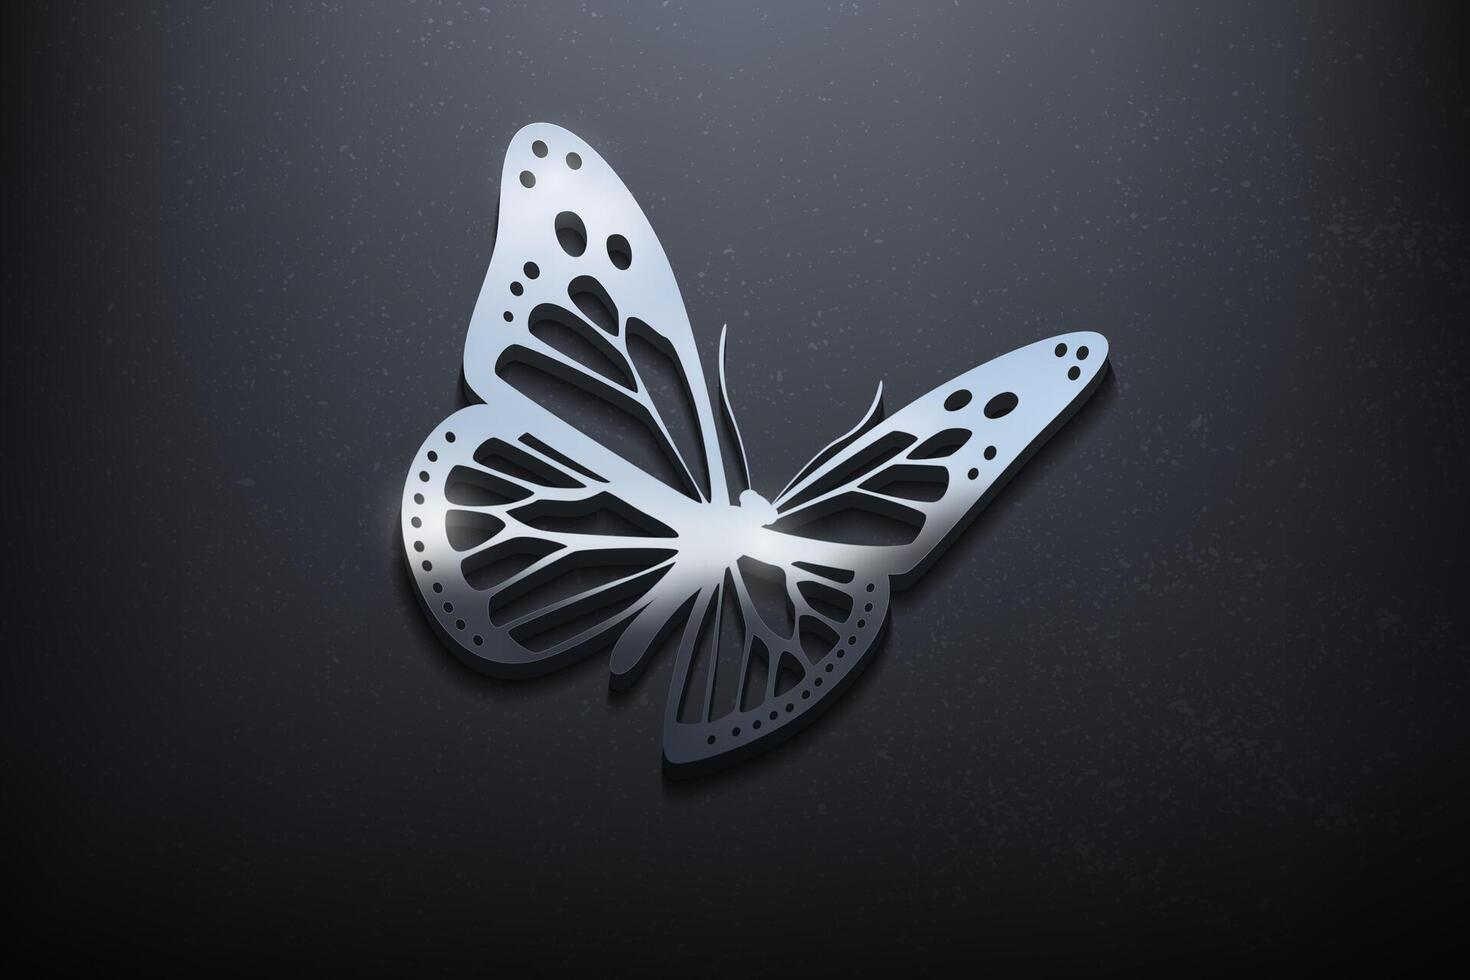 Butterfly 3D Logo Design, Shiny Mockup Logo with Textured Wall. Realistic Vector, Vector Illustration